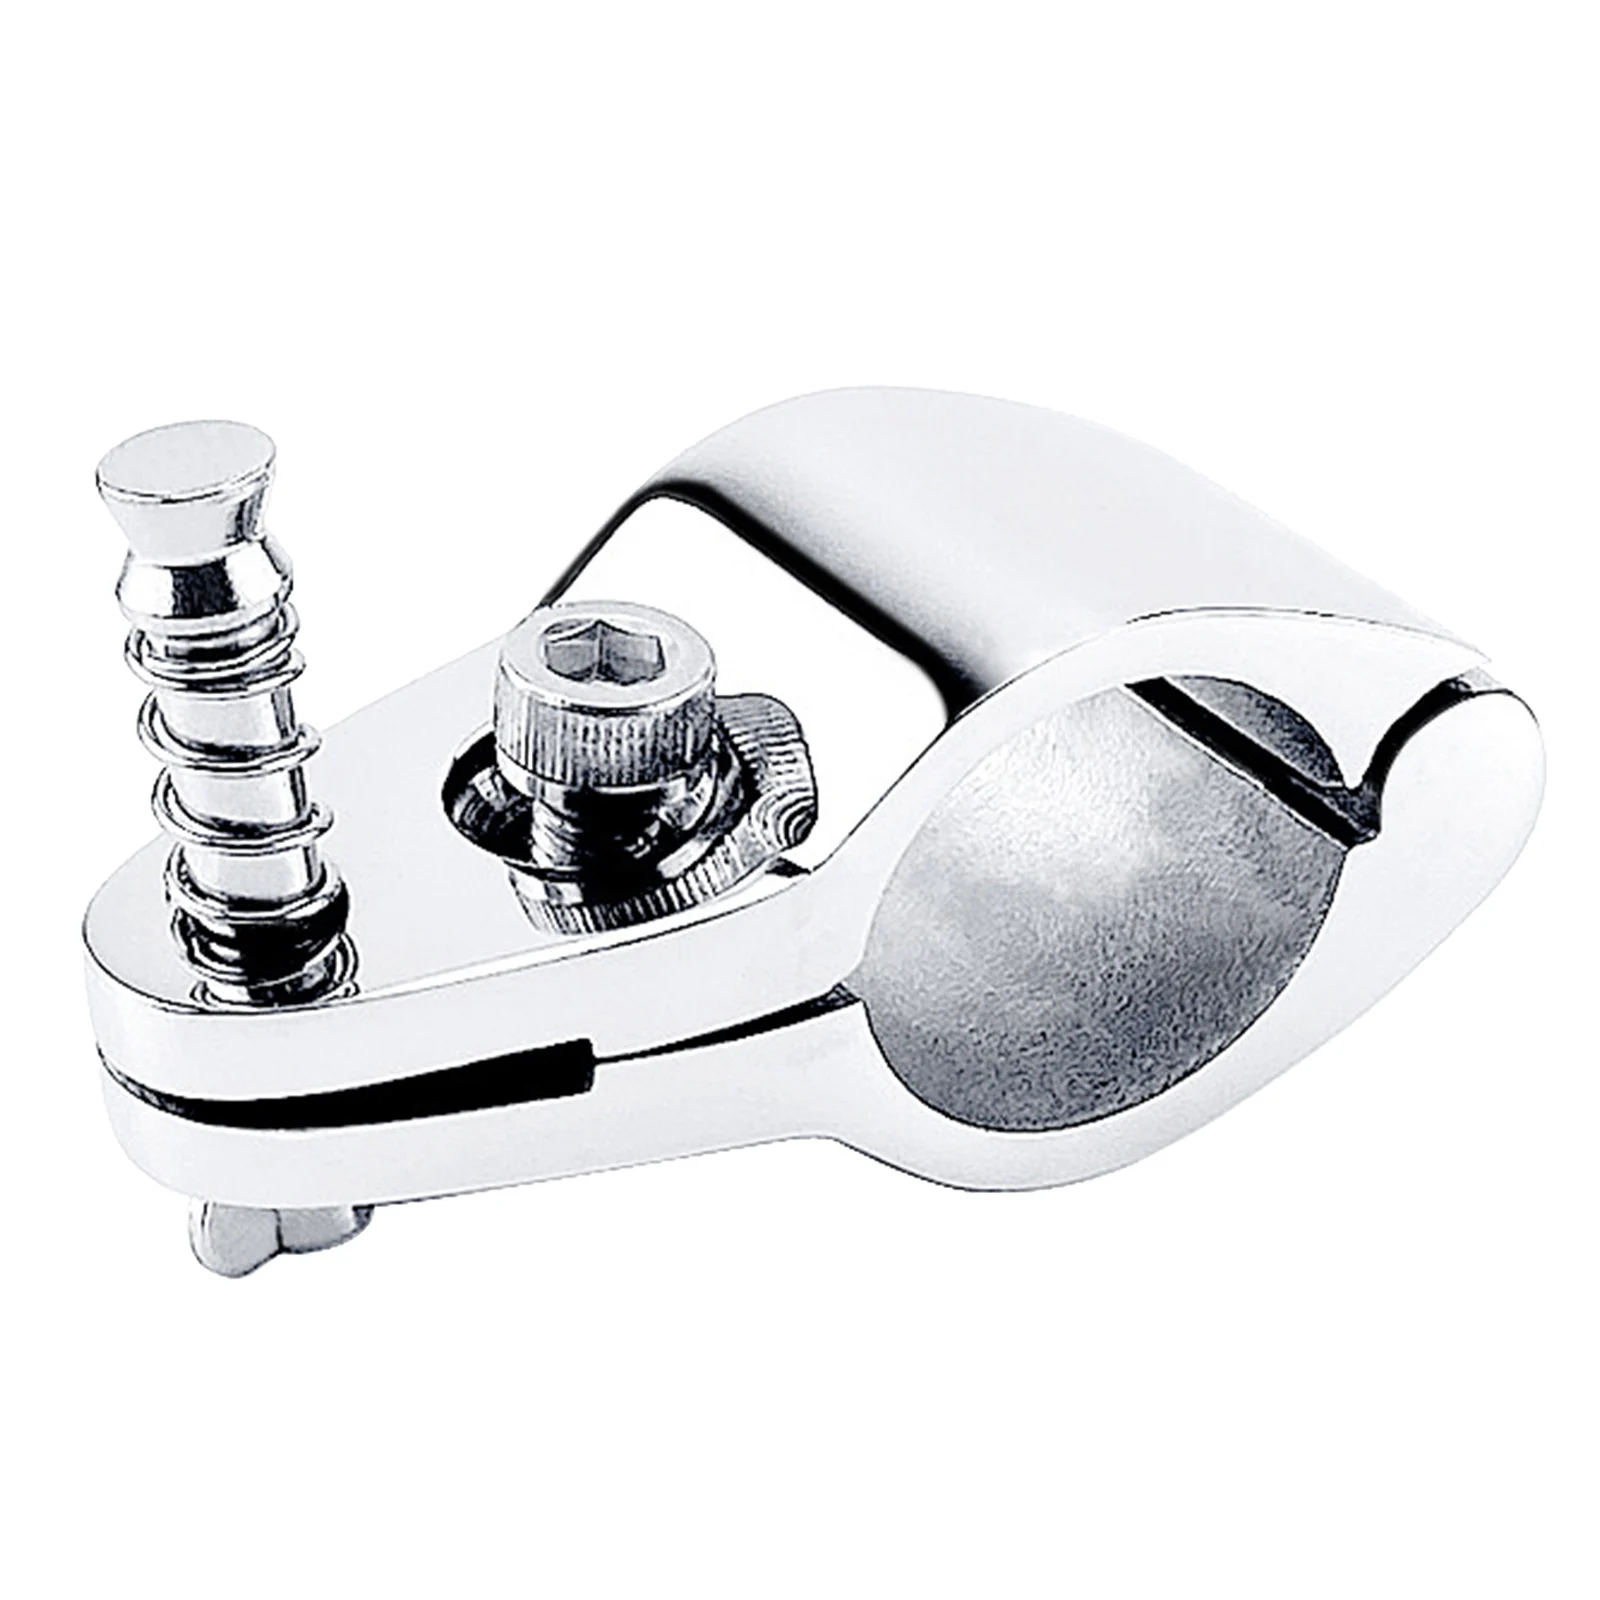 

316 Stainless Steel Boat Bimini Top Hinged Jaw Slide Hinge 1" 25mm Fitting Heavy Duty with Pin & Cam Clamp Quick Release